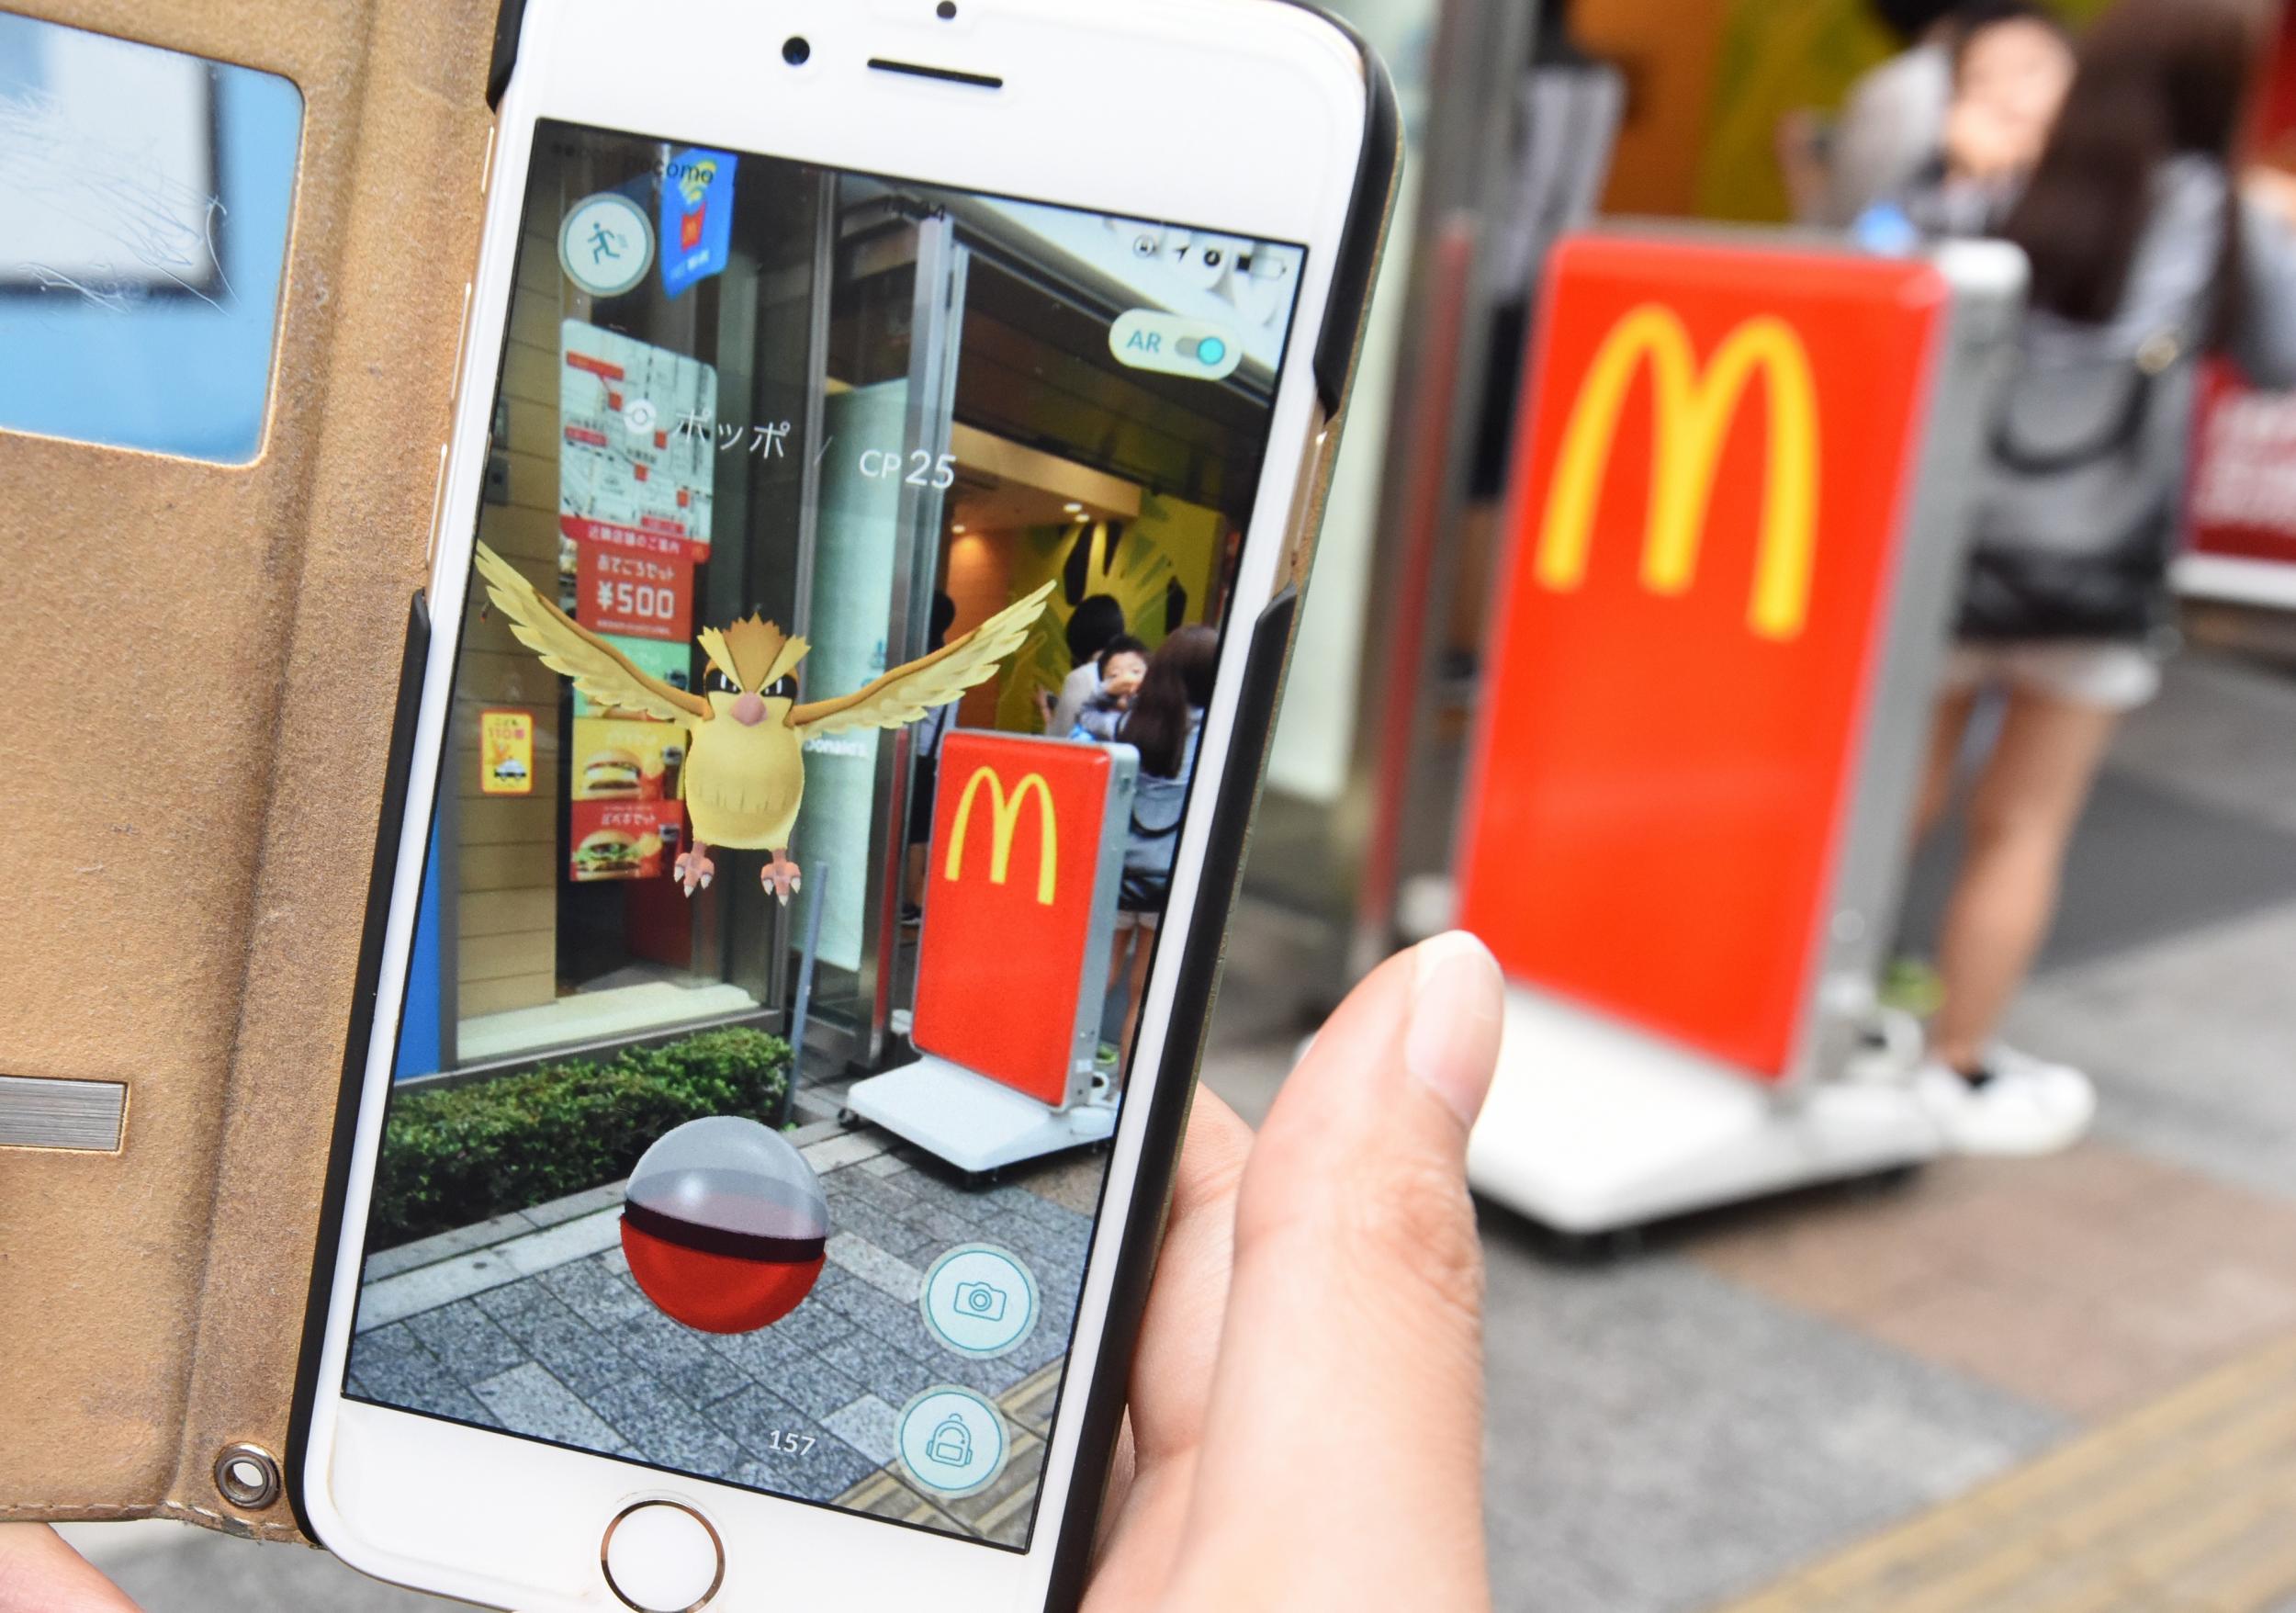 Town hall meetings with Japanese mums led McDonald's Japan to revamp food menus and forge partnerships with Pokemon Go